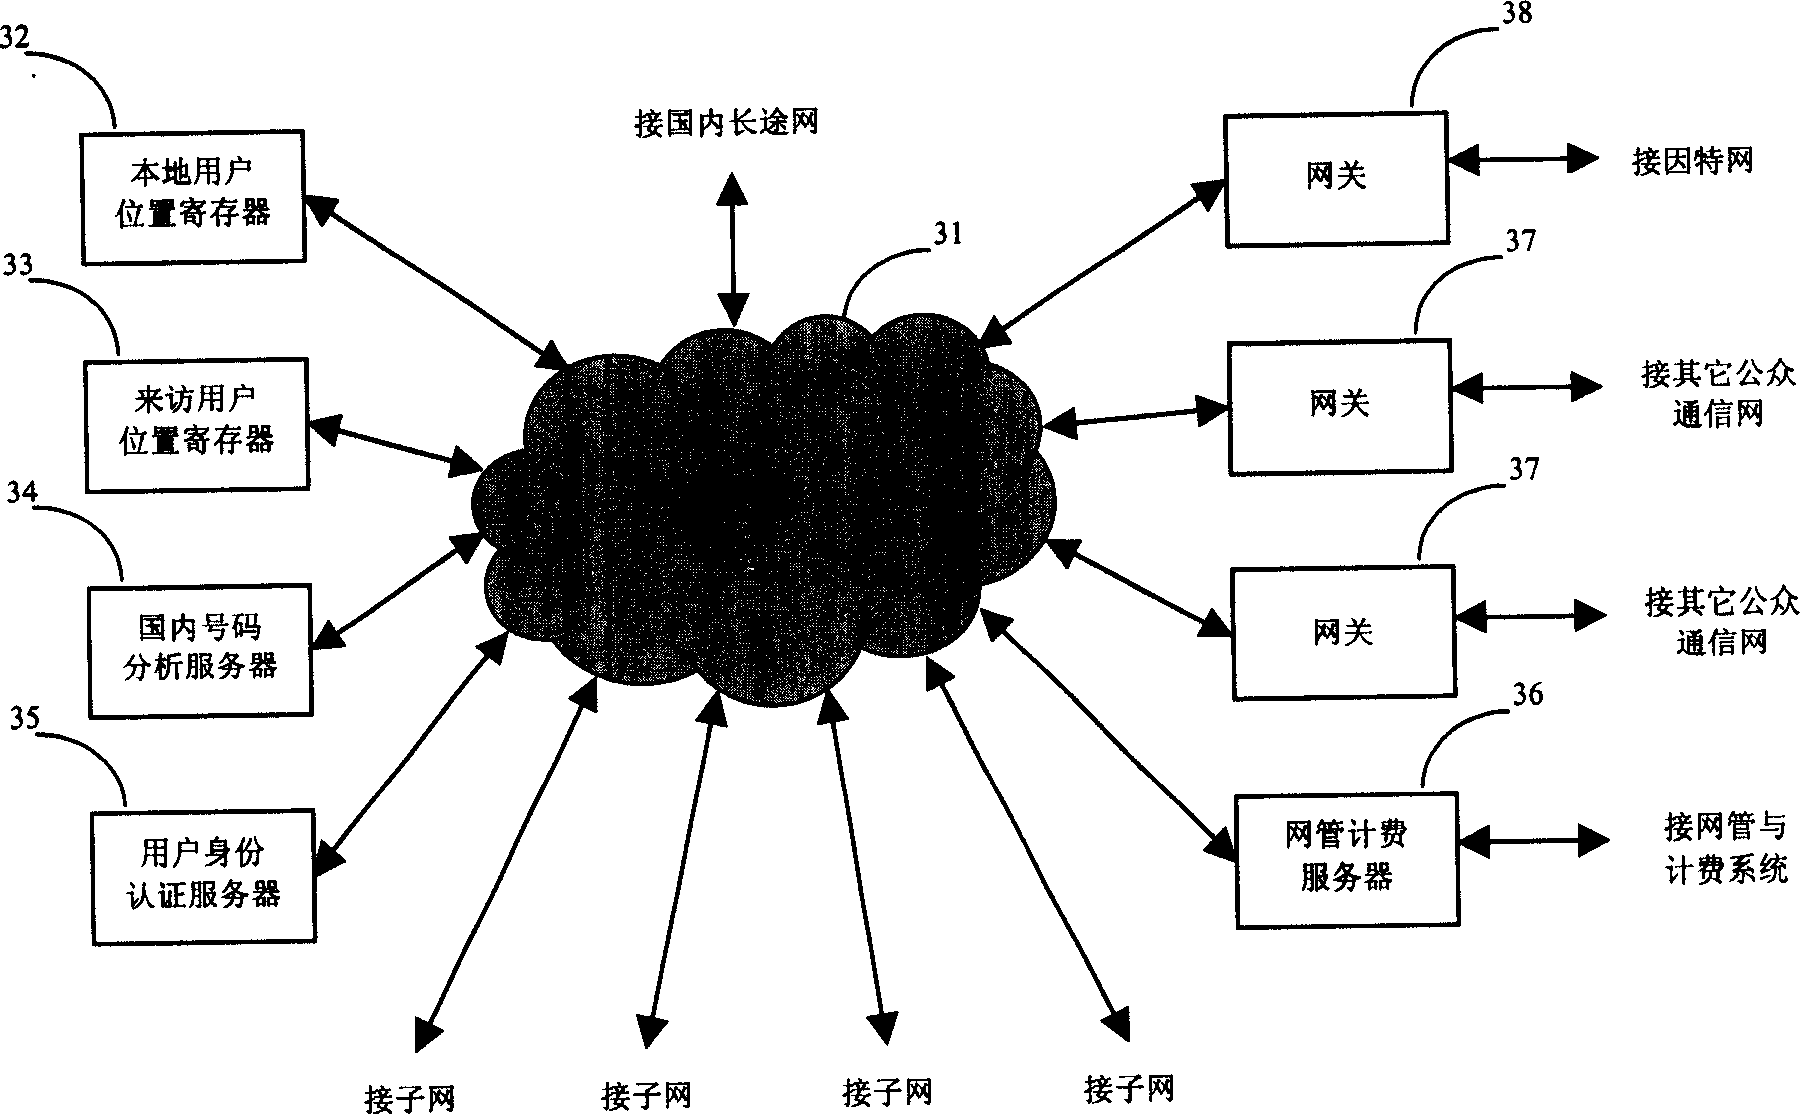 A cellular wireless LAN mobile multimedia communication system and method